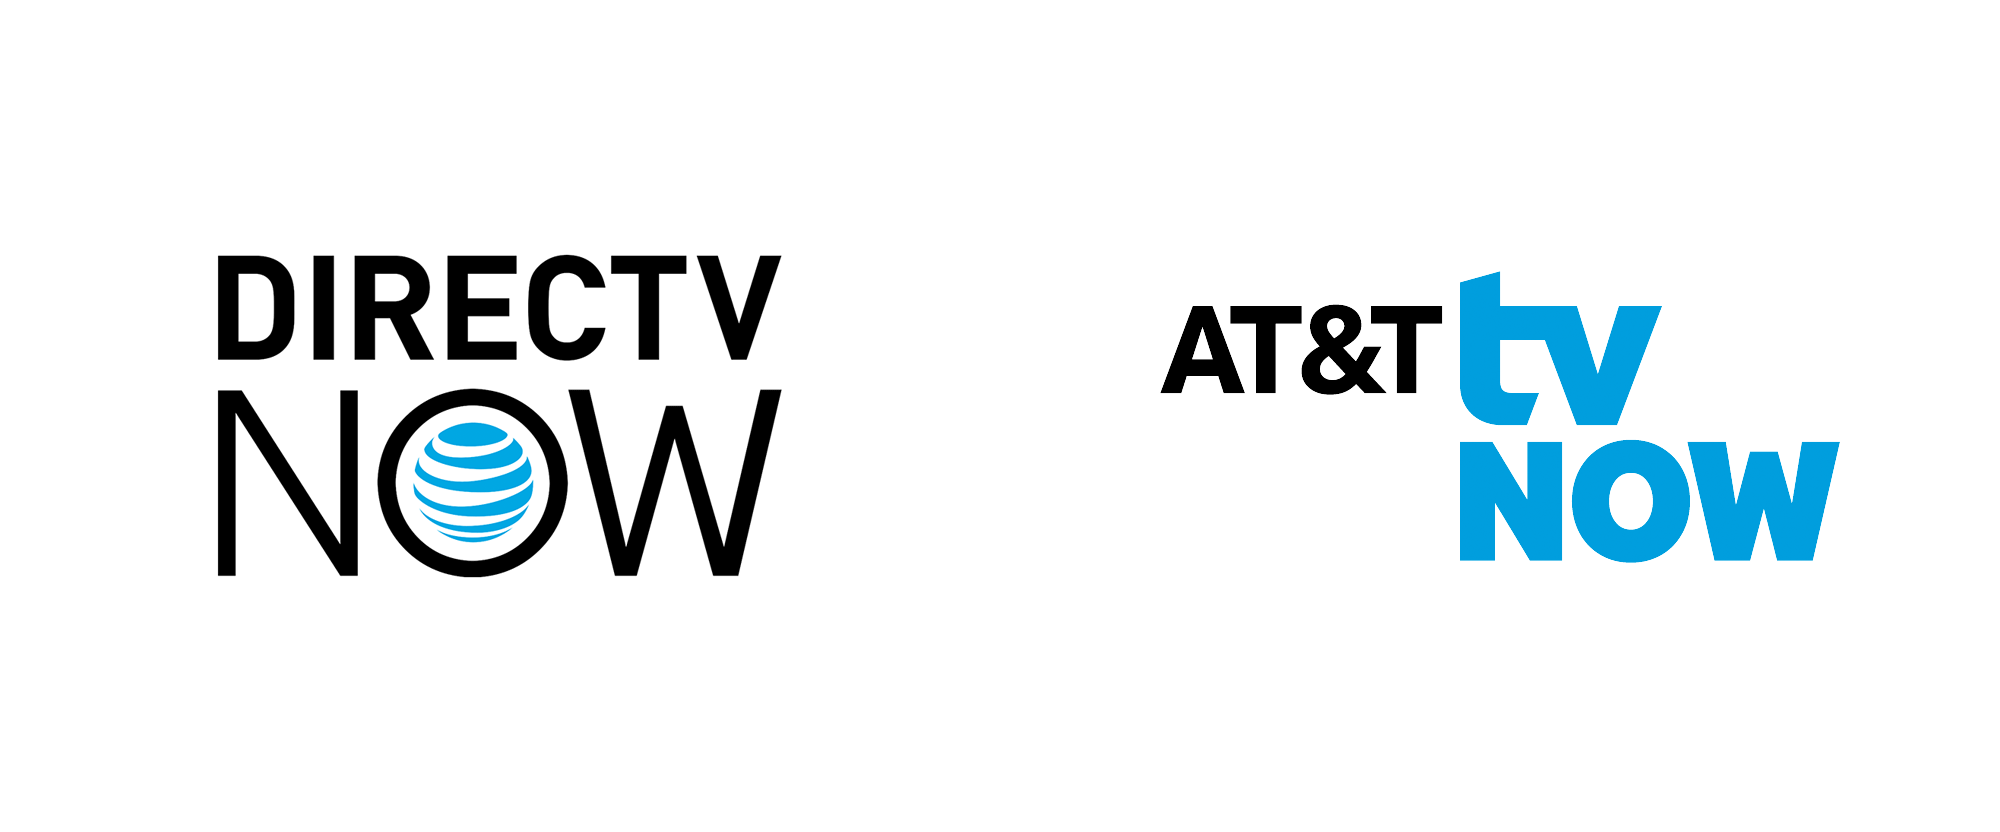 New Name and Logo for AT&T TV Now